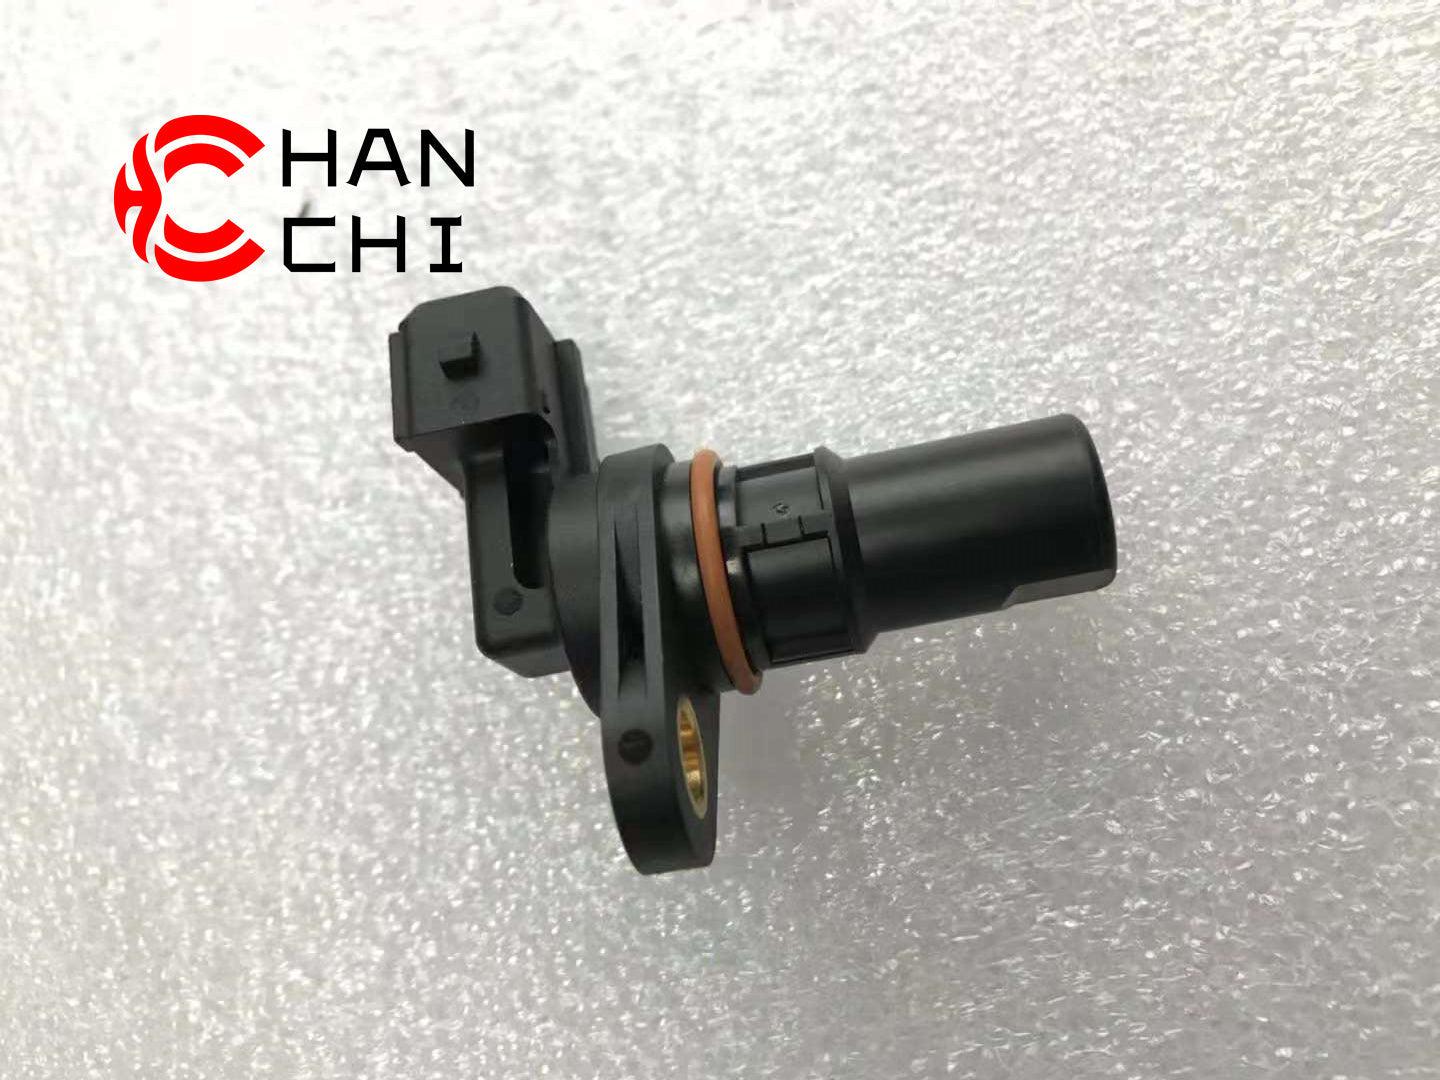 【Description】---☀Welcome to HANCHI☀---✔Good Quality✔Generally Applicability✔Competitive PriceEnjoy your shopping time↖（^ω^）↗【Features】Brand-New with High Quality for the Aftermarket.Totally mathced your need.**Stable Quality**High Precision**Easy Installation**【Specification】OEM：3602120-C20-0000Material：ABSColor：blackOrigin：Made in ChinaWeight：100g【Packing List】1* Crankshaft Position Sensor 【More Service】 We can provide OEM service We can Be your one-step solution for Auto Parts We can provide t